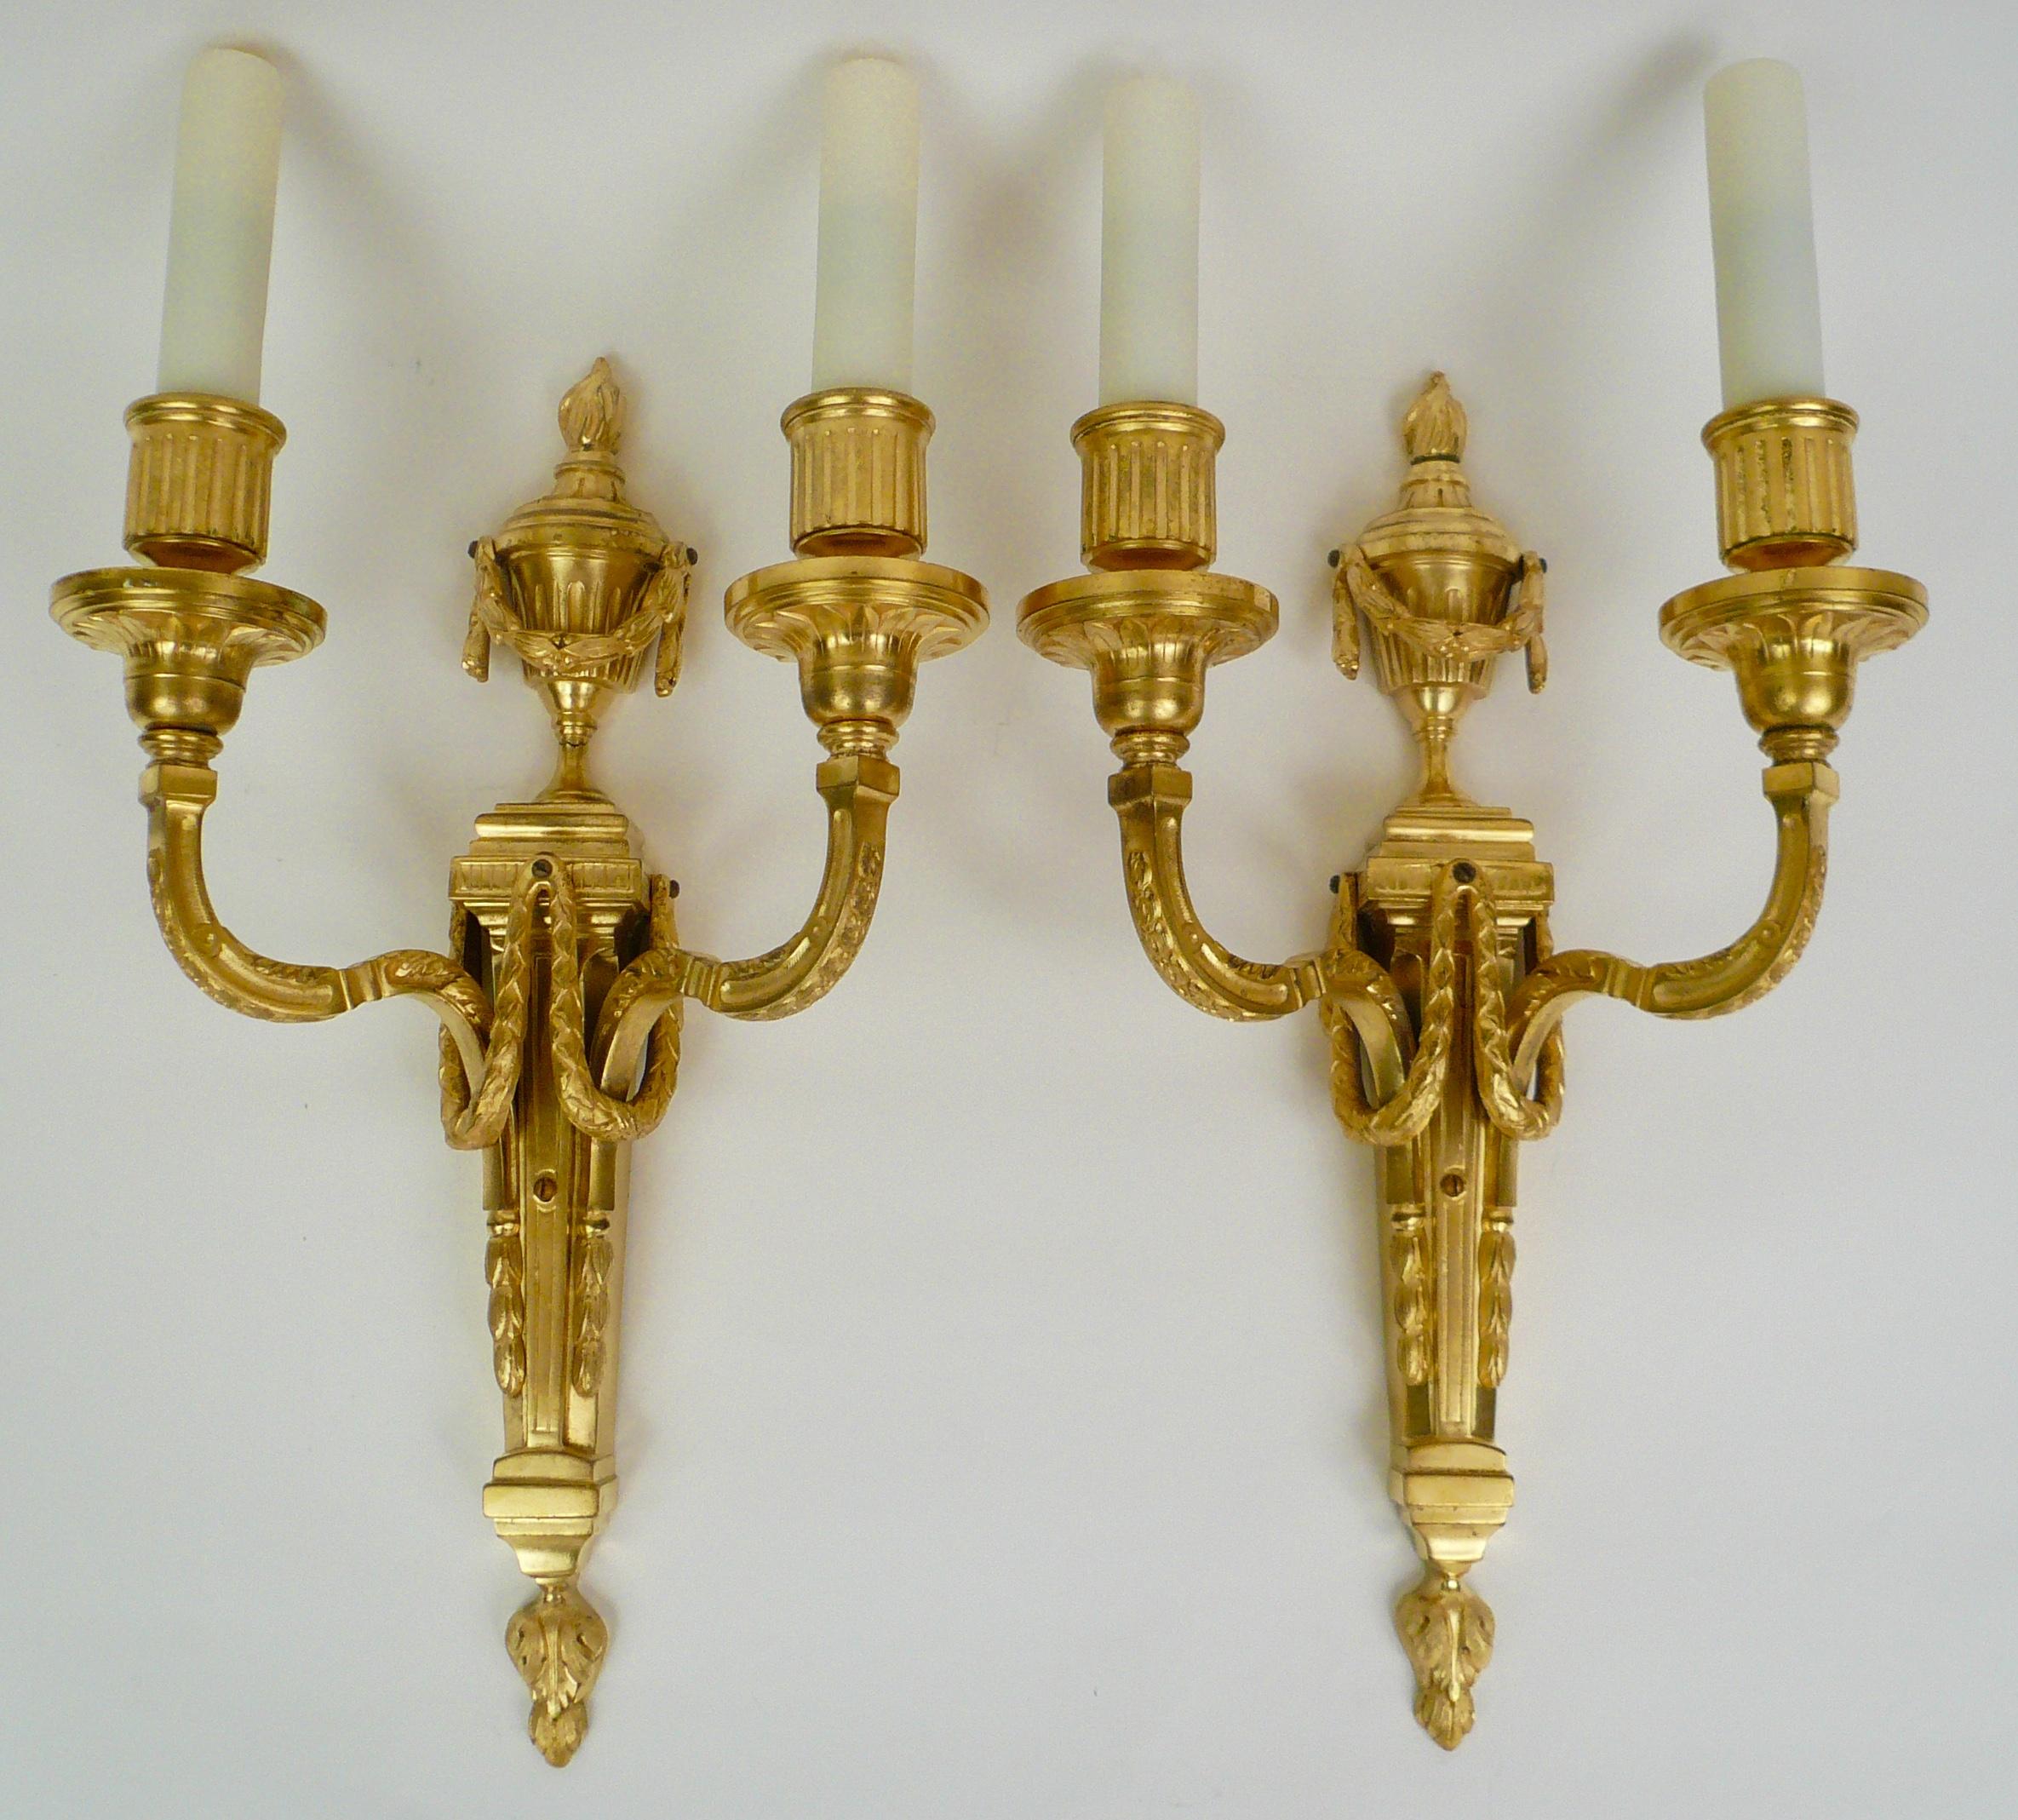 This finely details pair of Louis XVI style sconces feature Neo-Classical motifs including urns. swags and acanthus leaves. They retain their original gilding and are signed Caldwell.